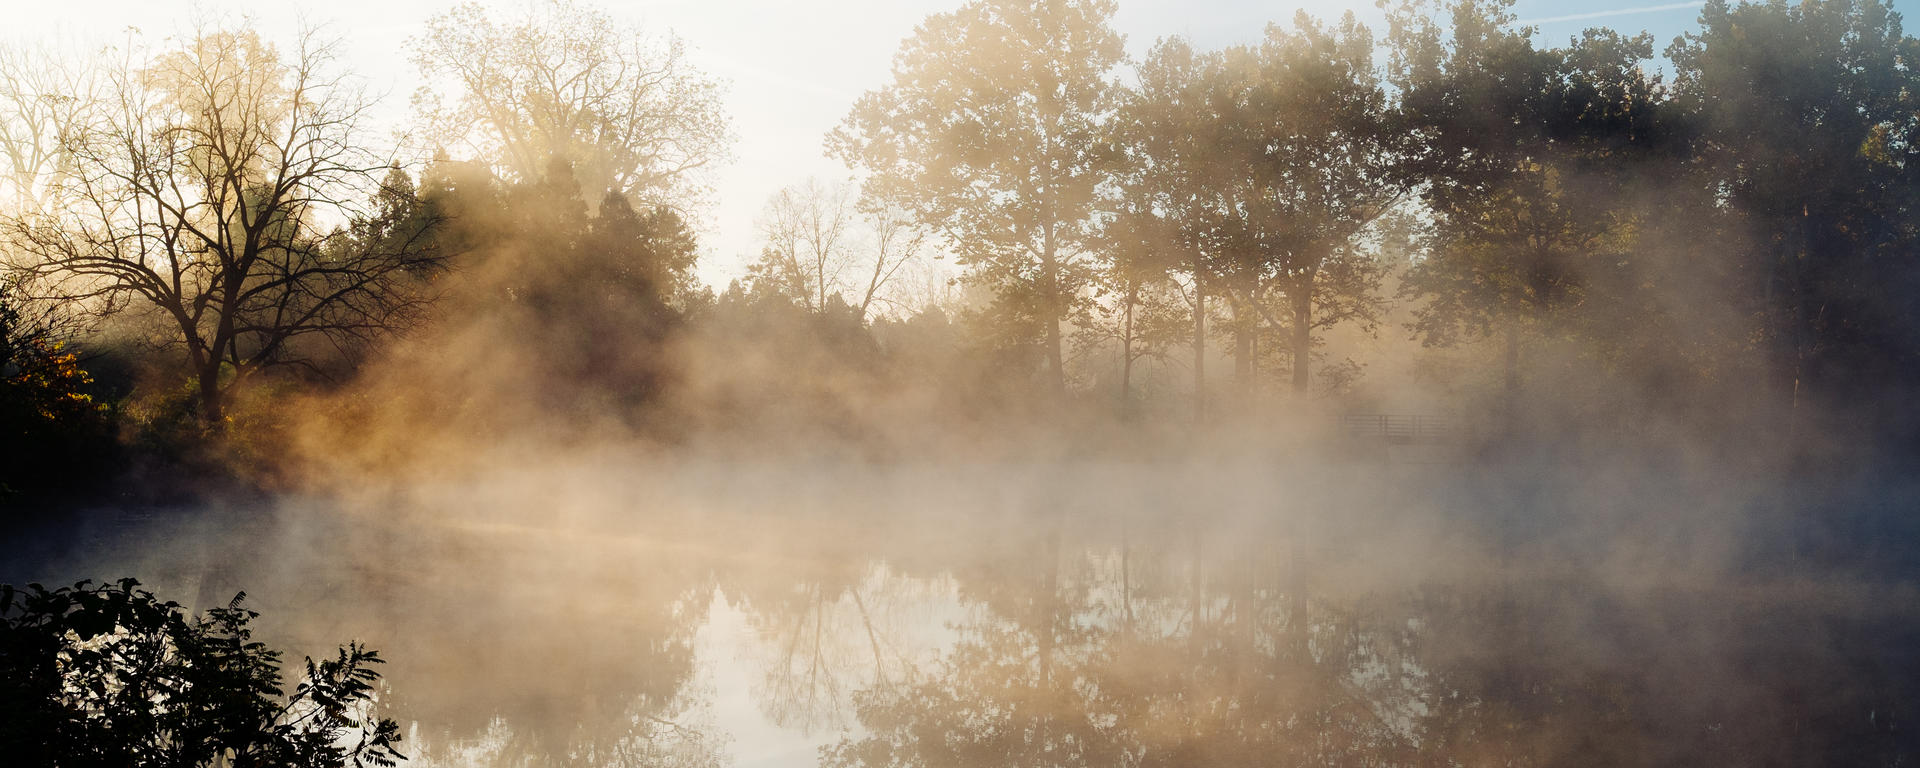 "Misty Morning" by Conal Gallagher is licensed with CC BY 2.0. To view a copy of this license, visit https://creativecommons.org/licenses/by/2.0/"